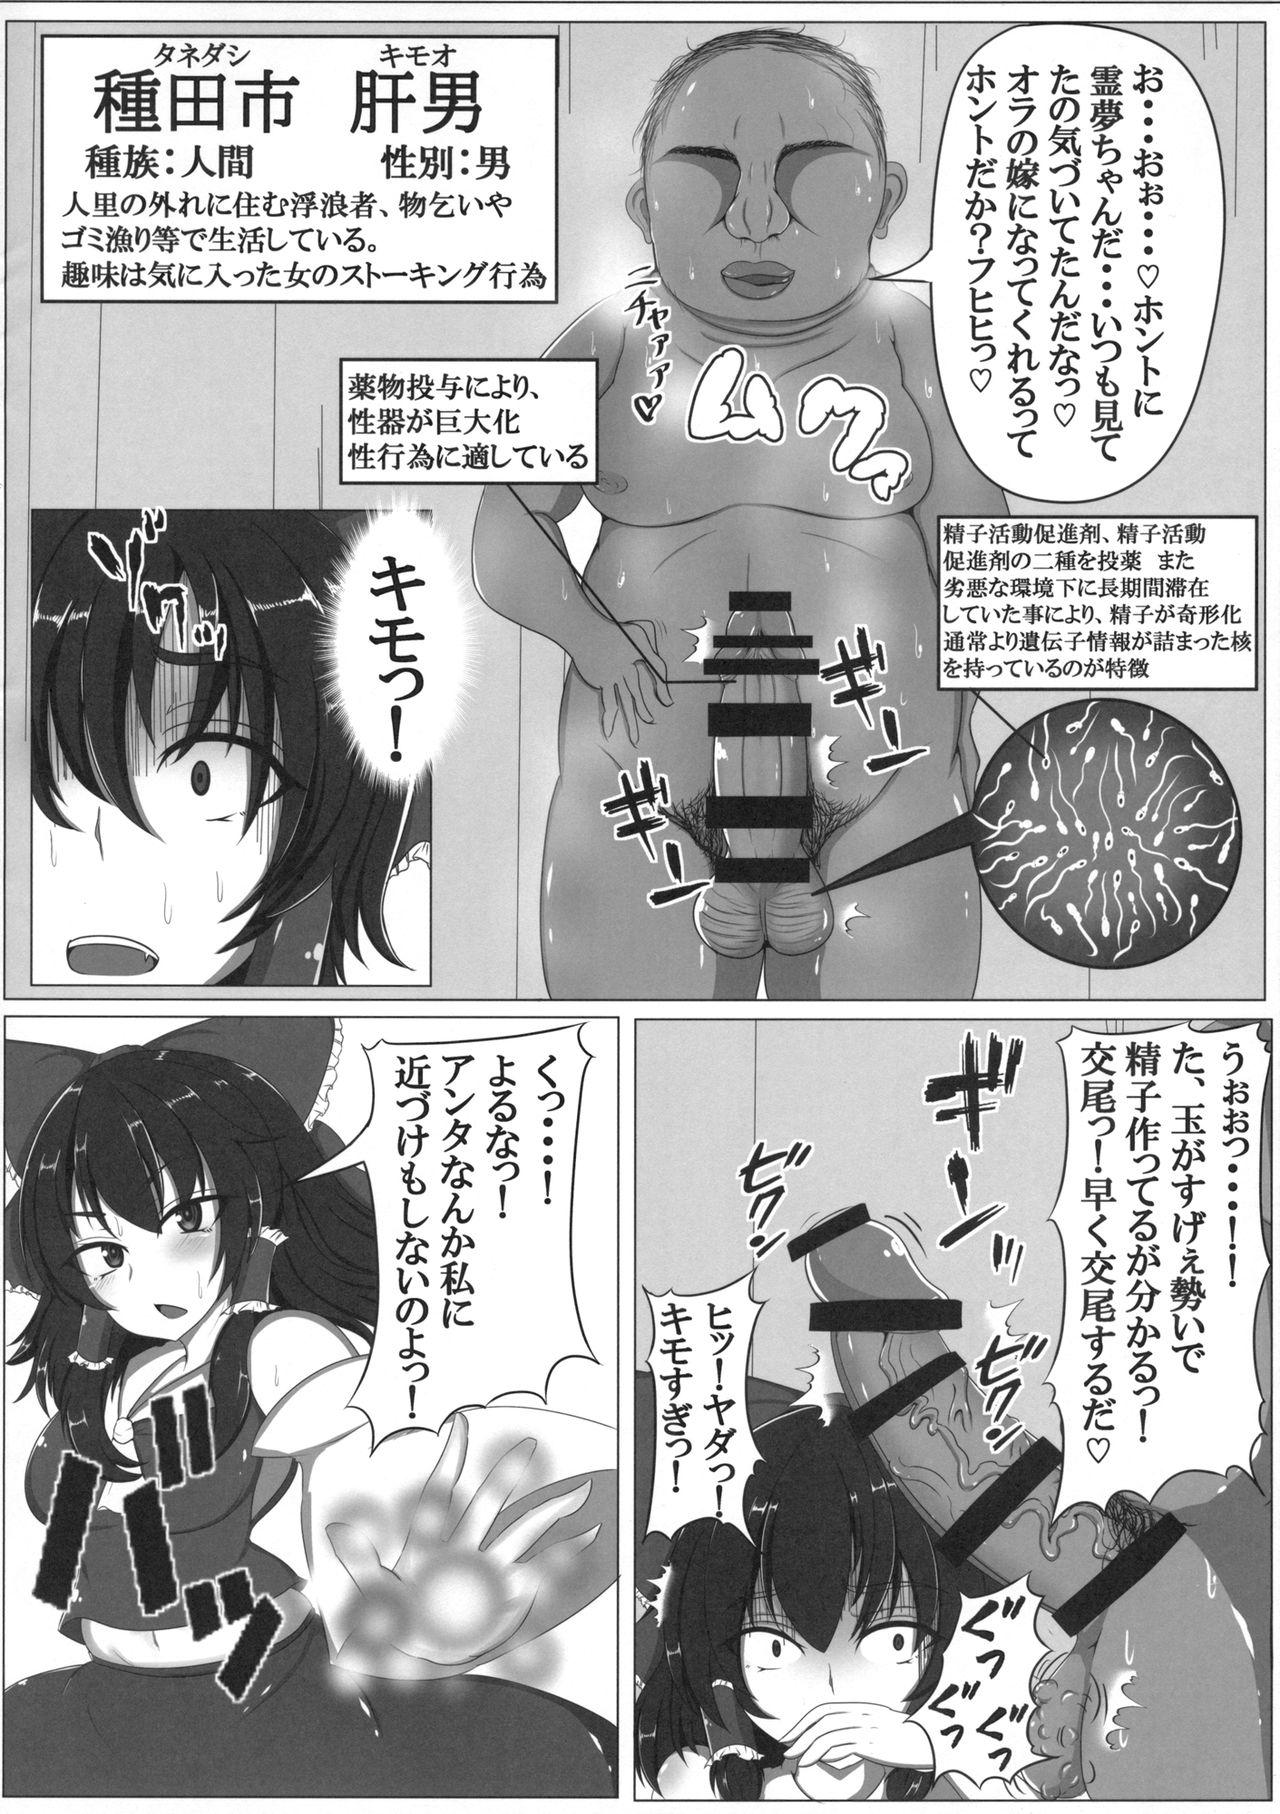 Glamour Porn 東方婚姻録～博麗霊夢編～ - Touhou project Pussy Play - Page 5